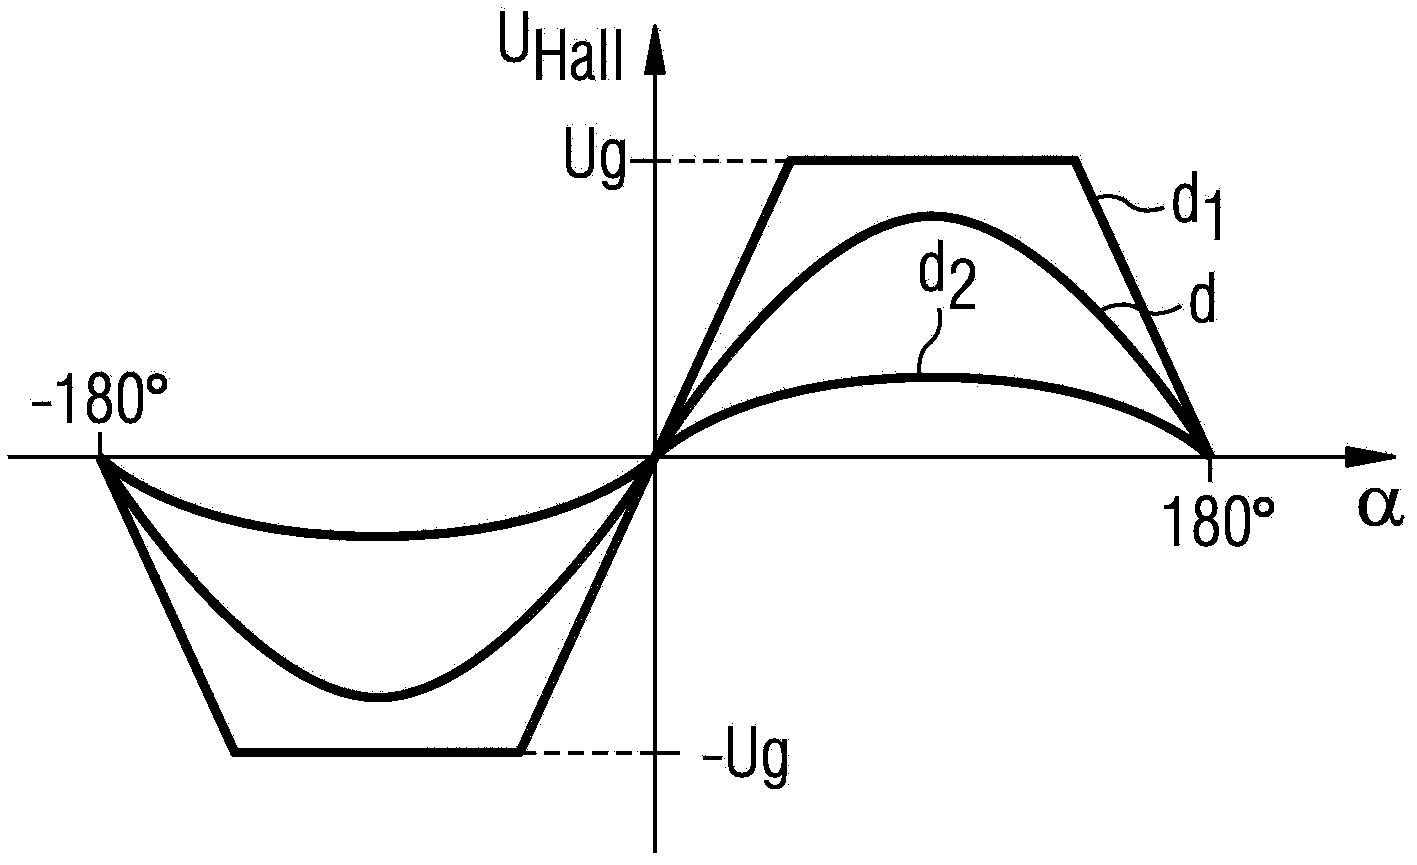 Method for analyzing signals from an angle sensor